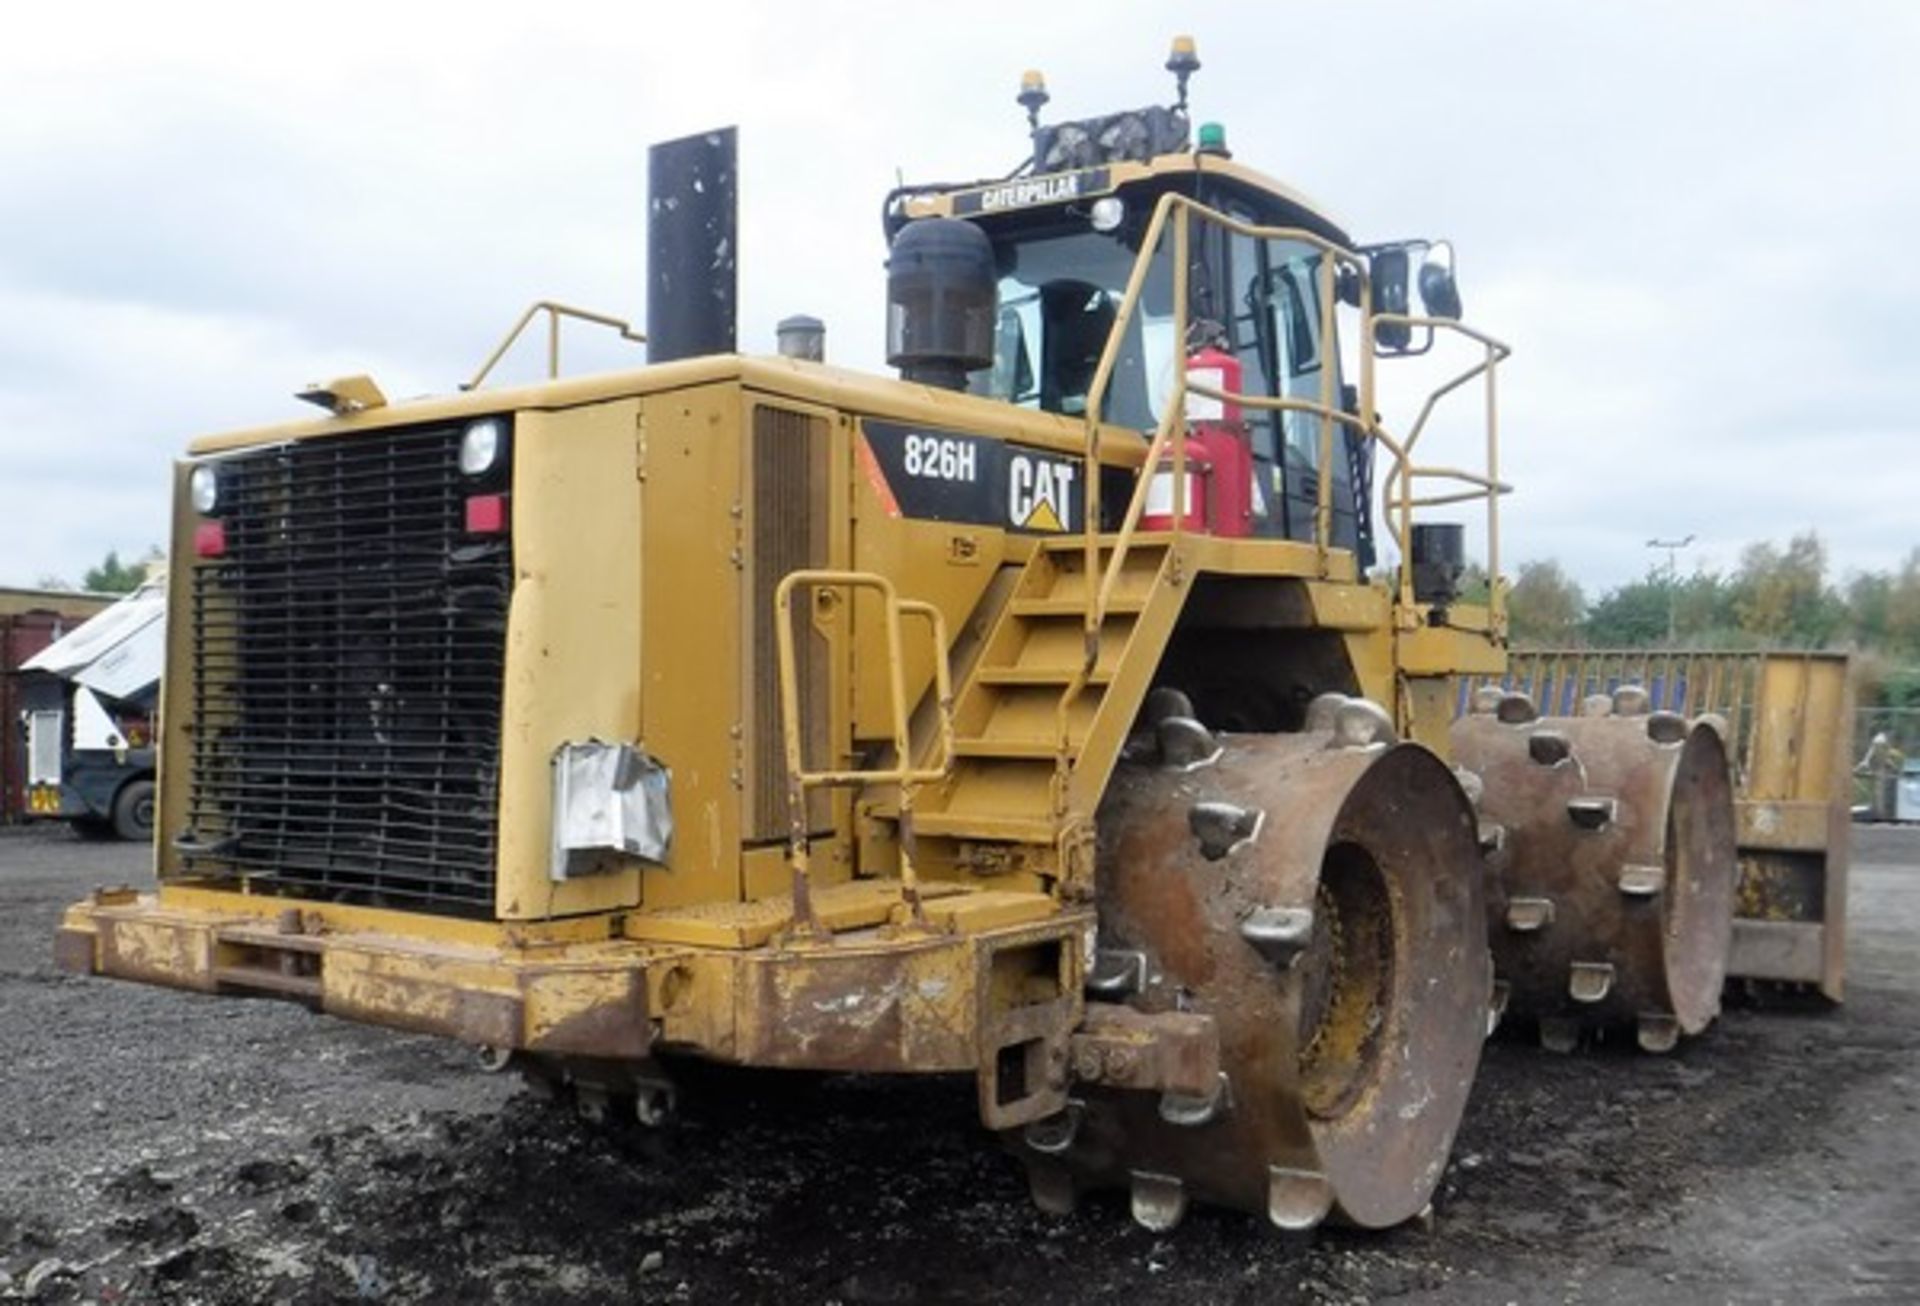 2010 CATERPILLAR 826H landfill compactor c/w service history folder, original invoice and other rele - Image 21 of 24